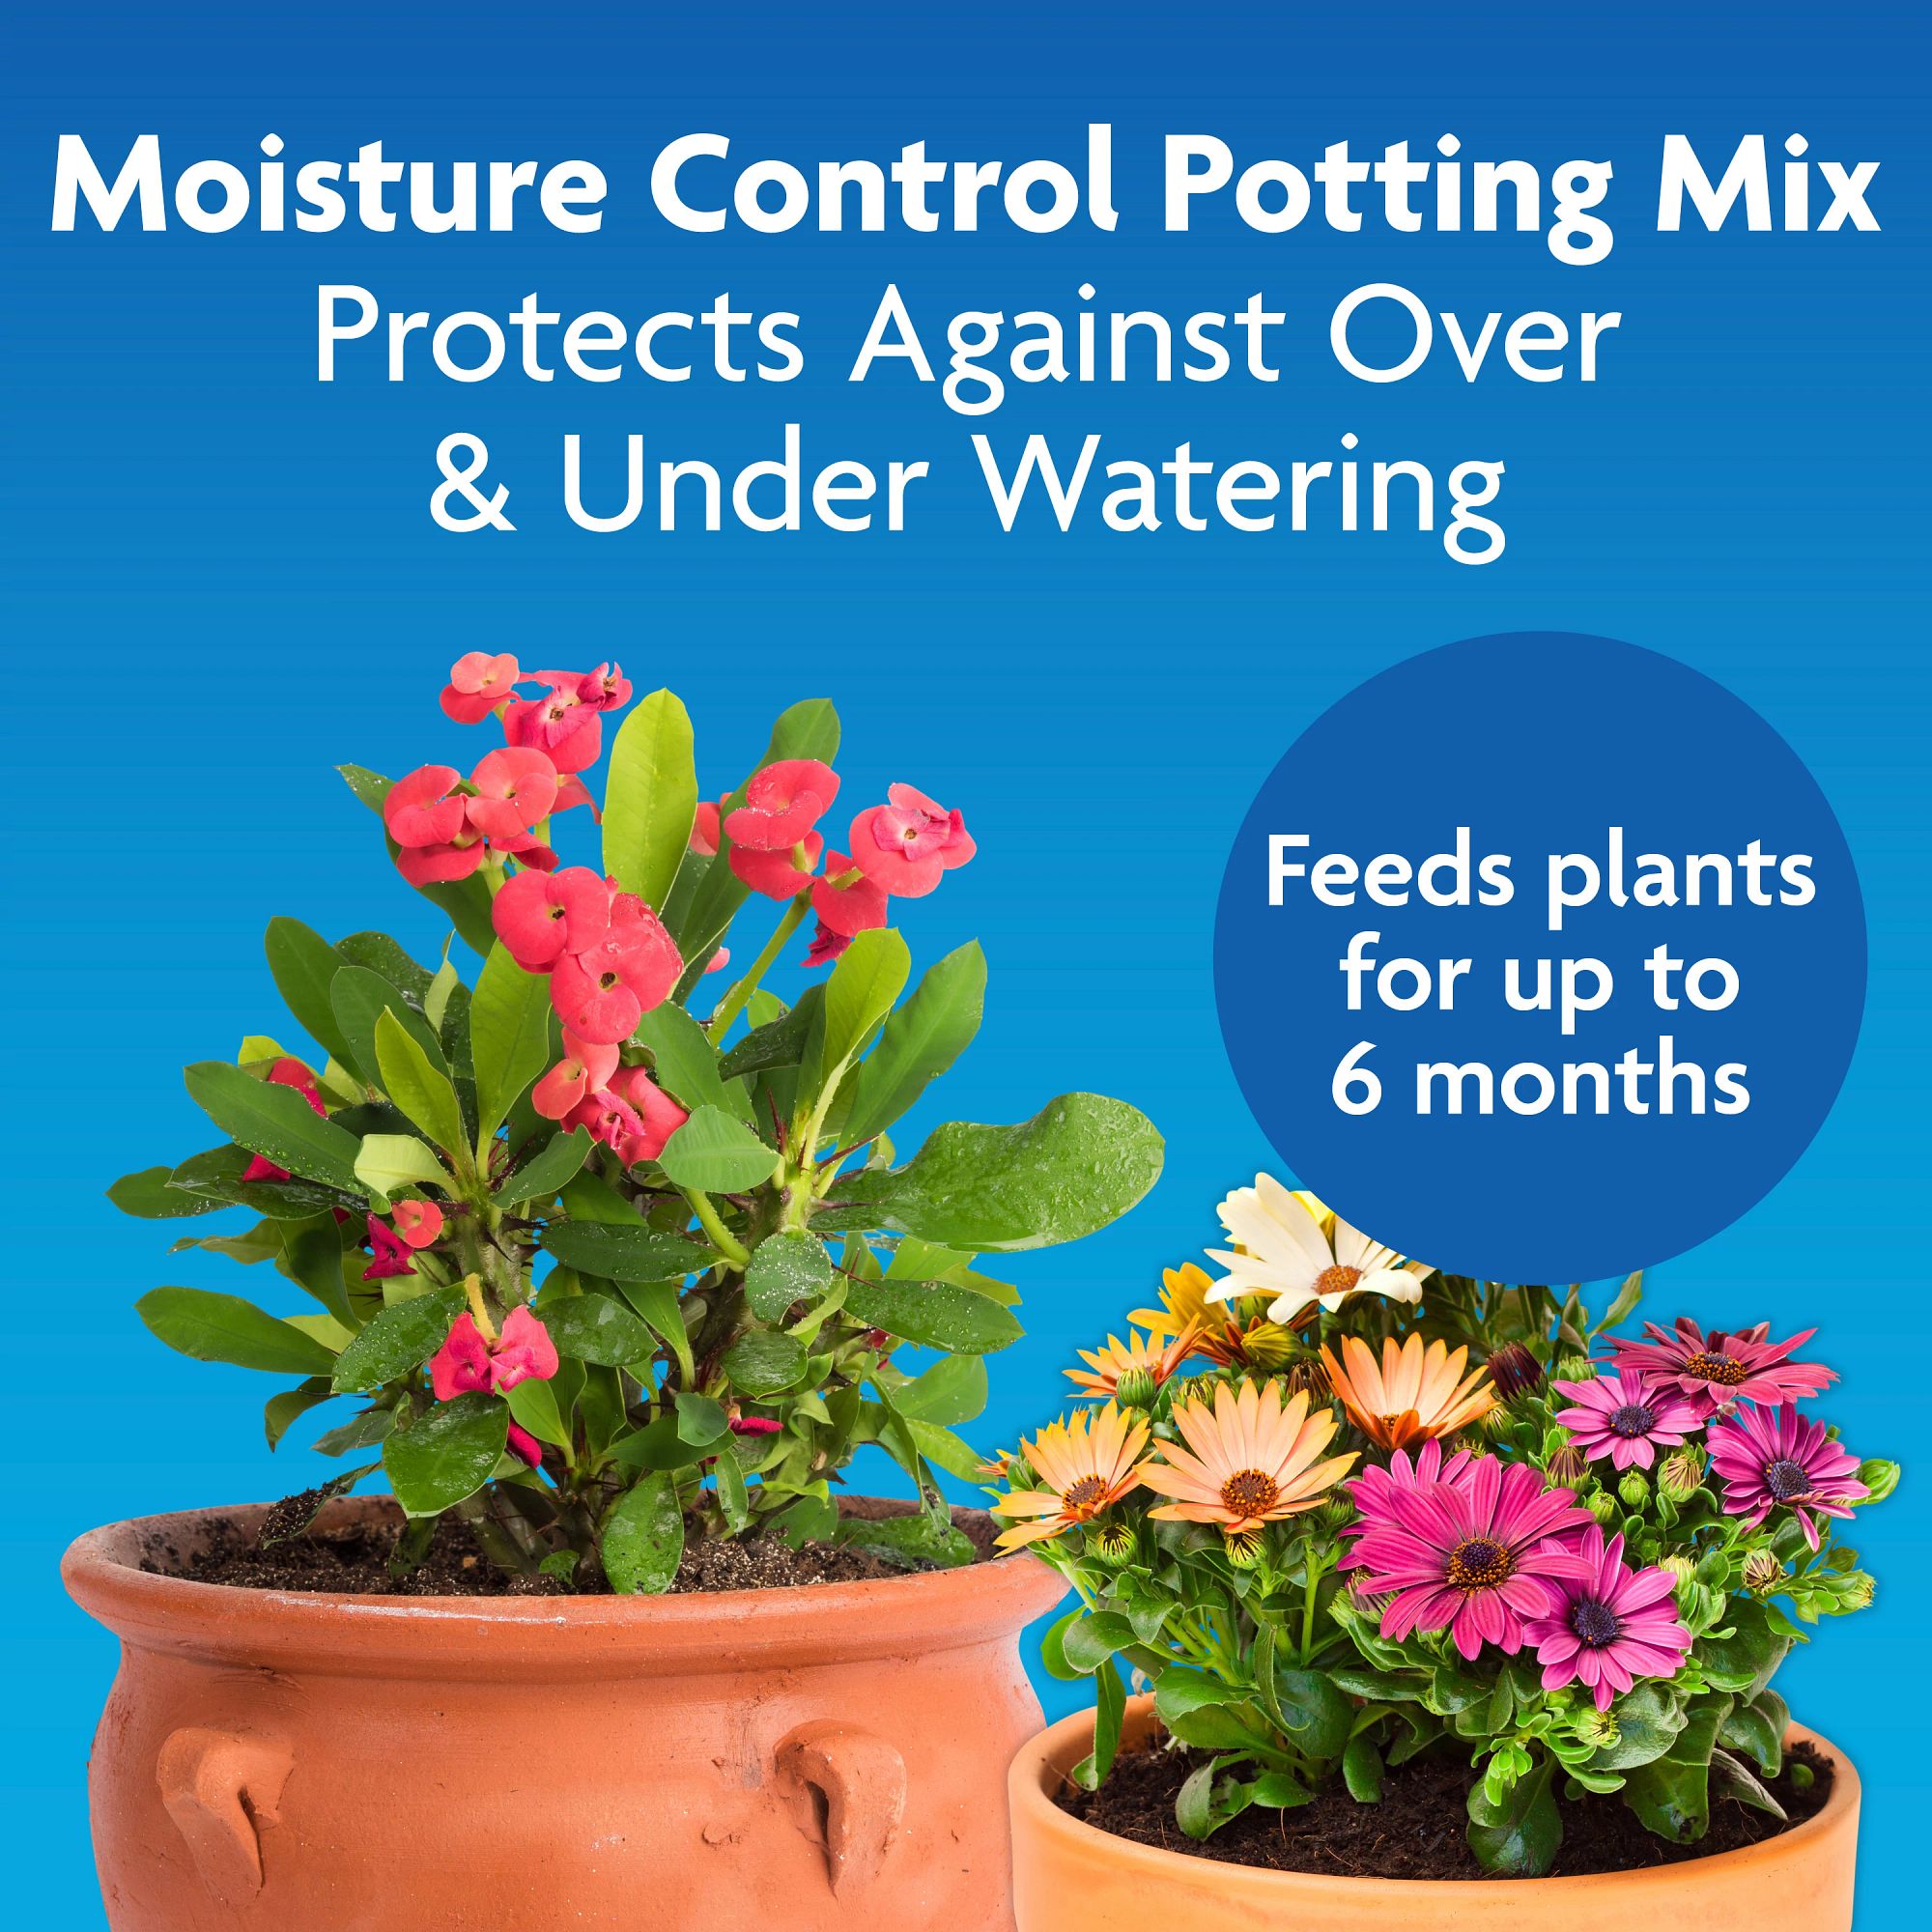 Miracle-Gro Moisture Control Potting Mix, 1 cu. ft., Feeds up to 6 Months - image 4 of 12